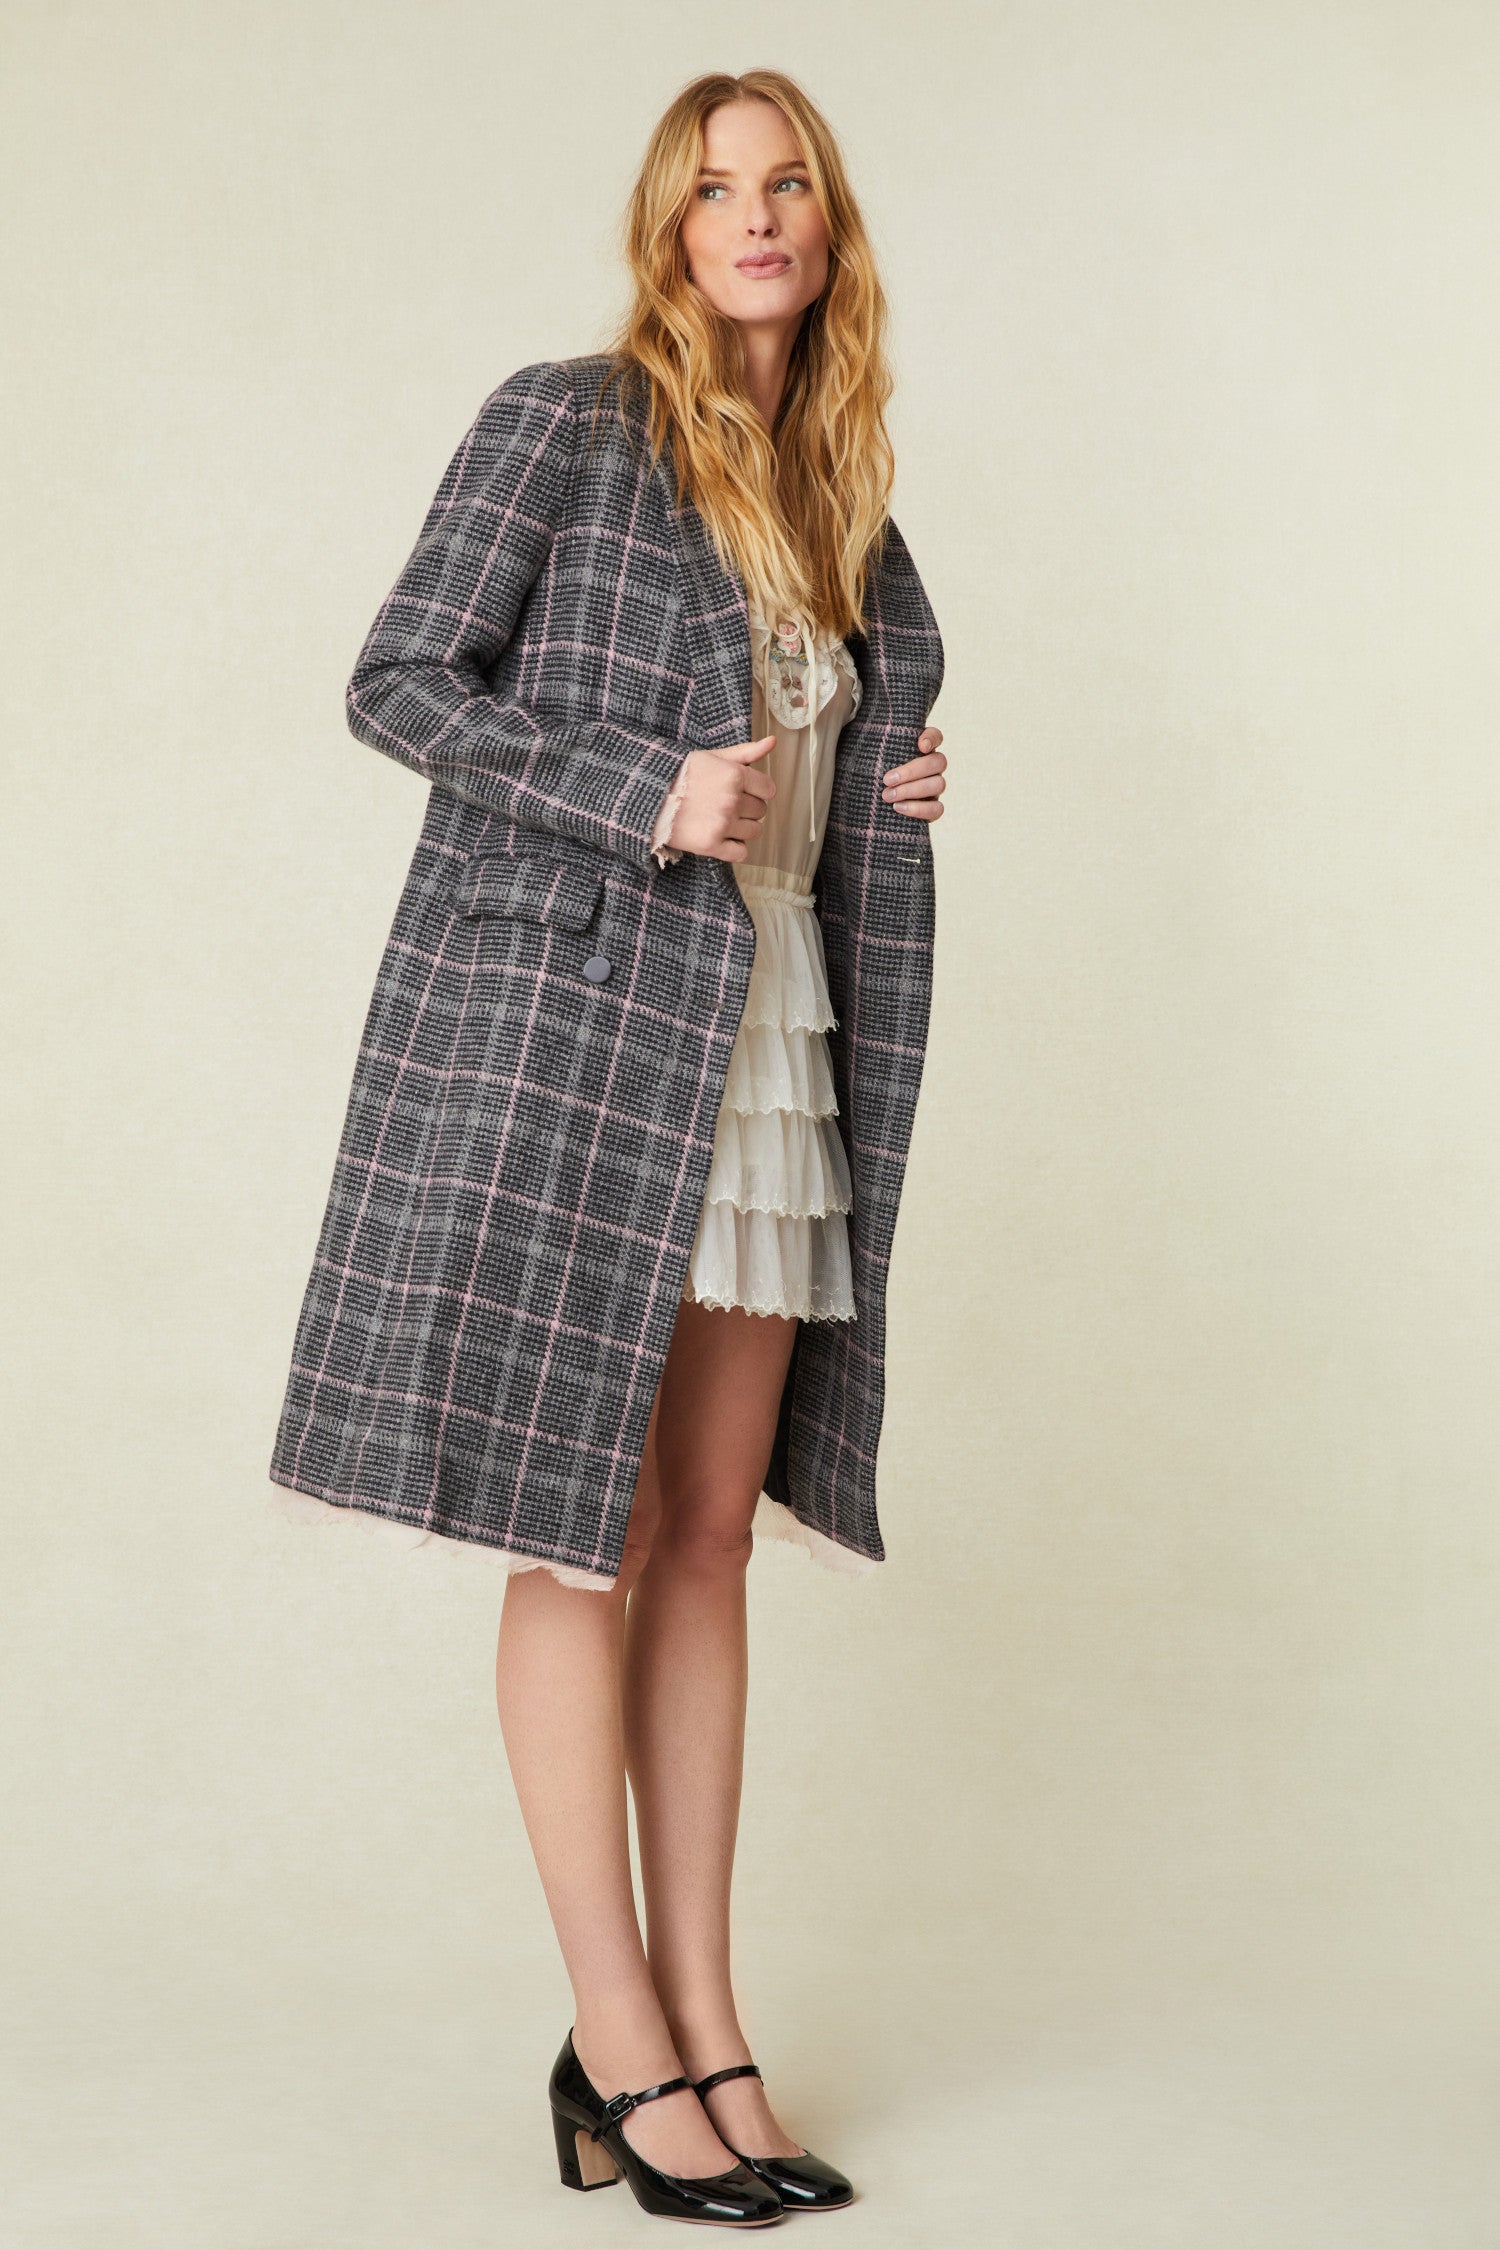 Double breasted grey plaid and pink print coat.